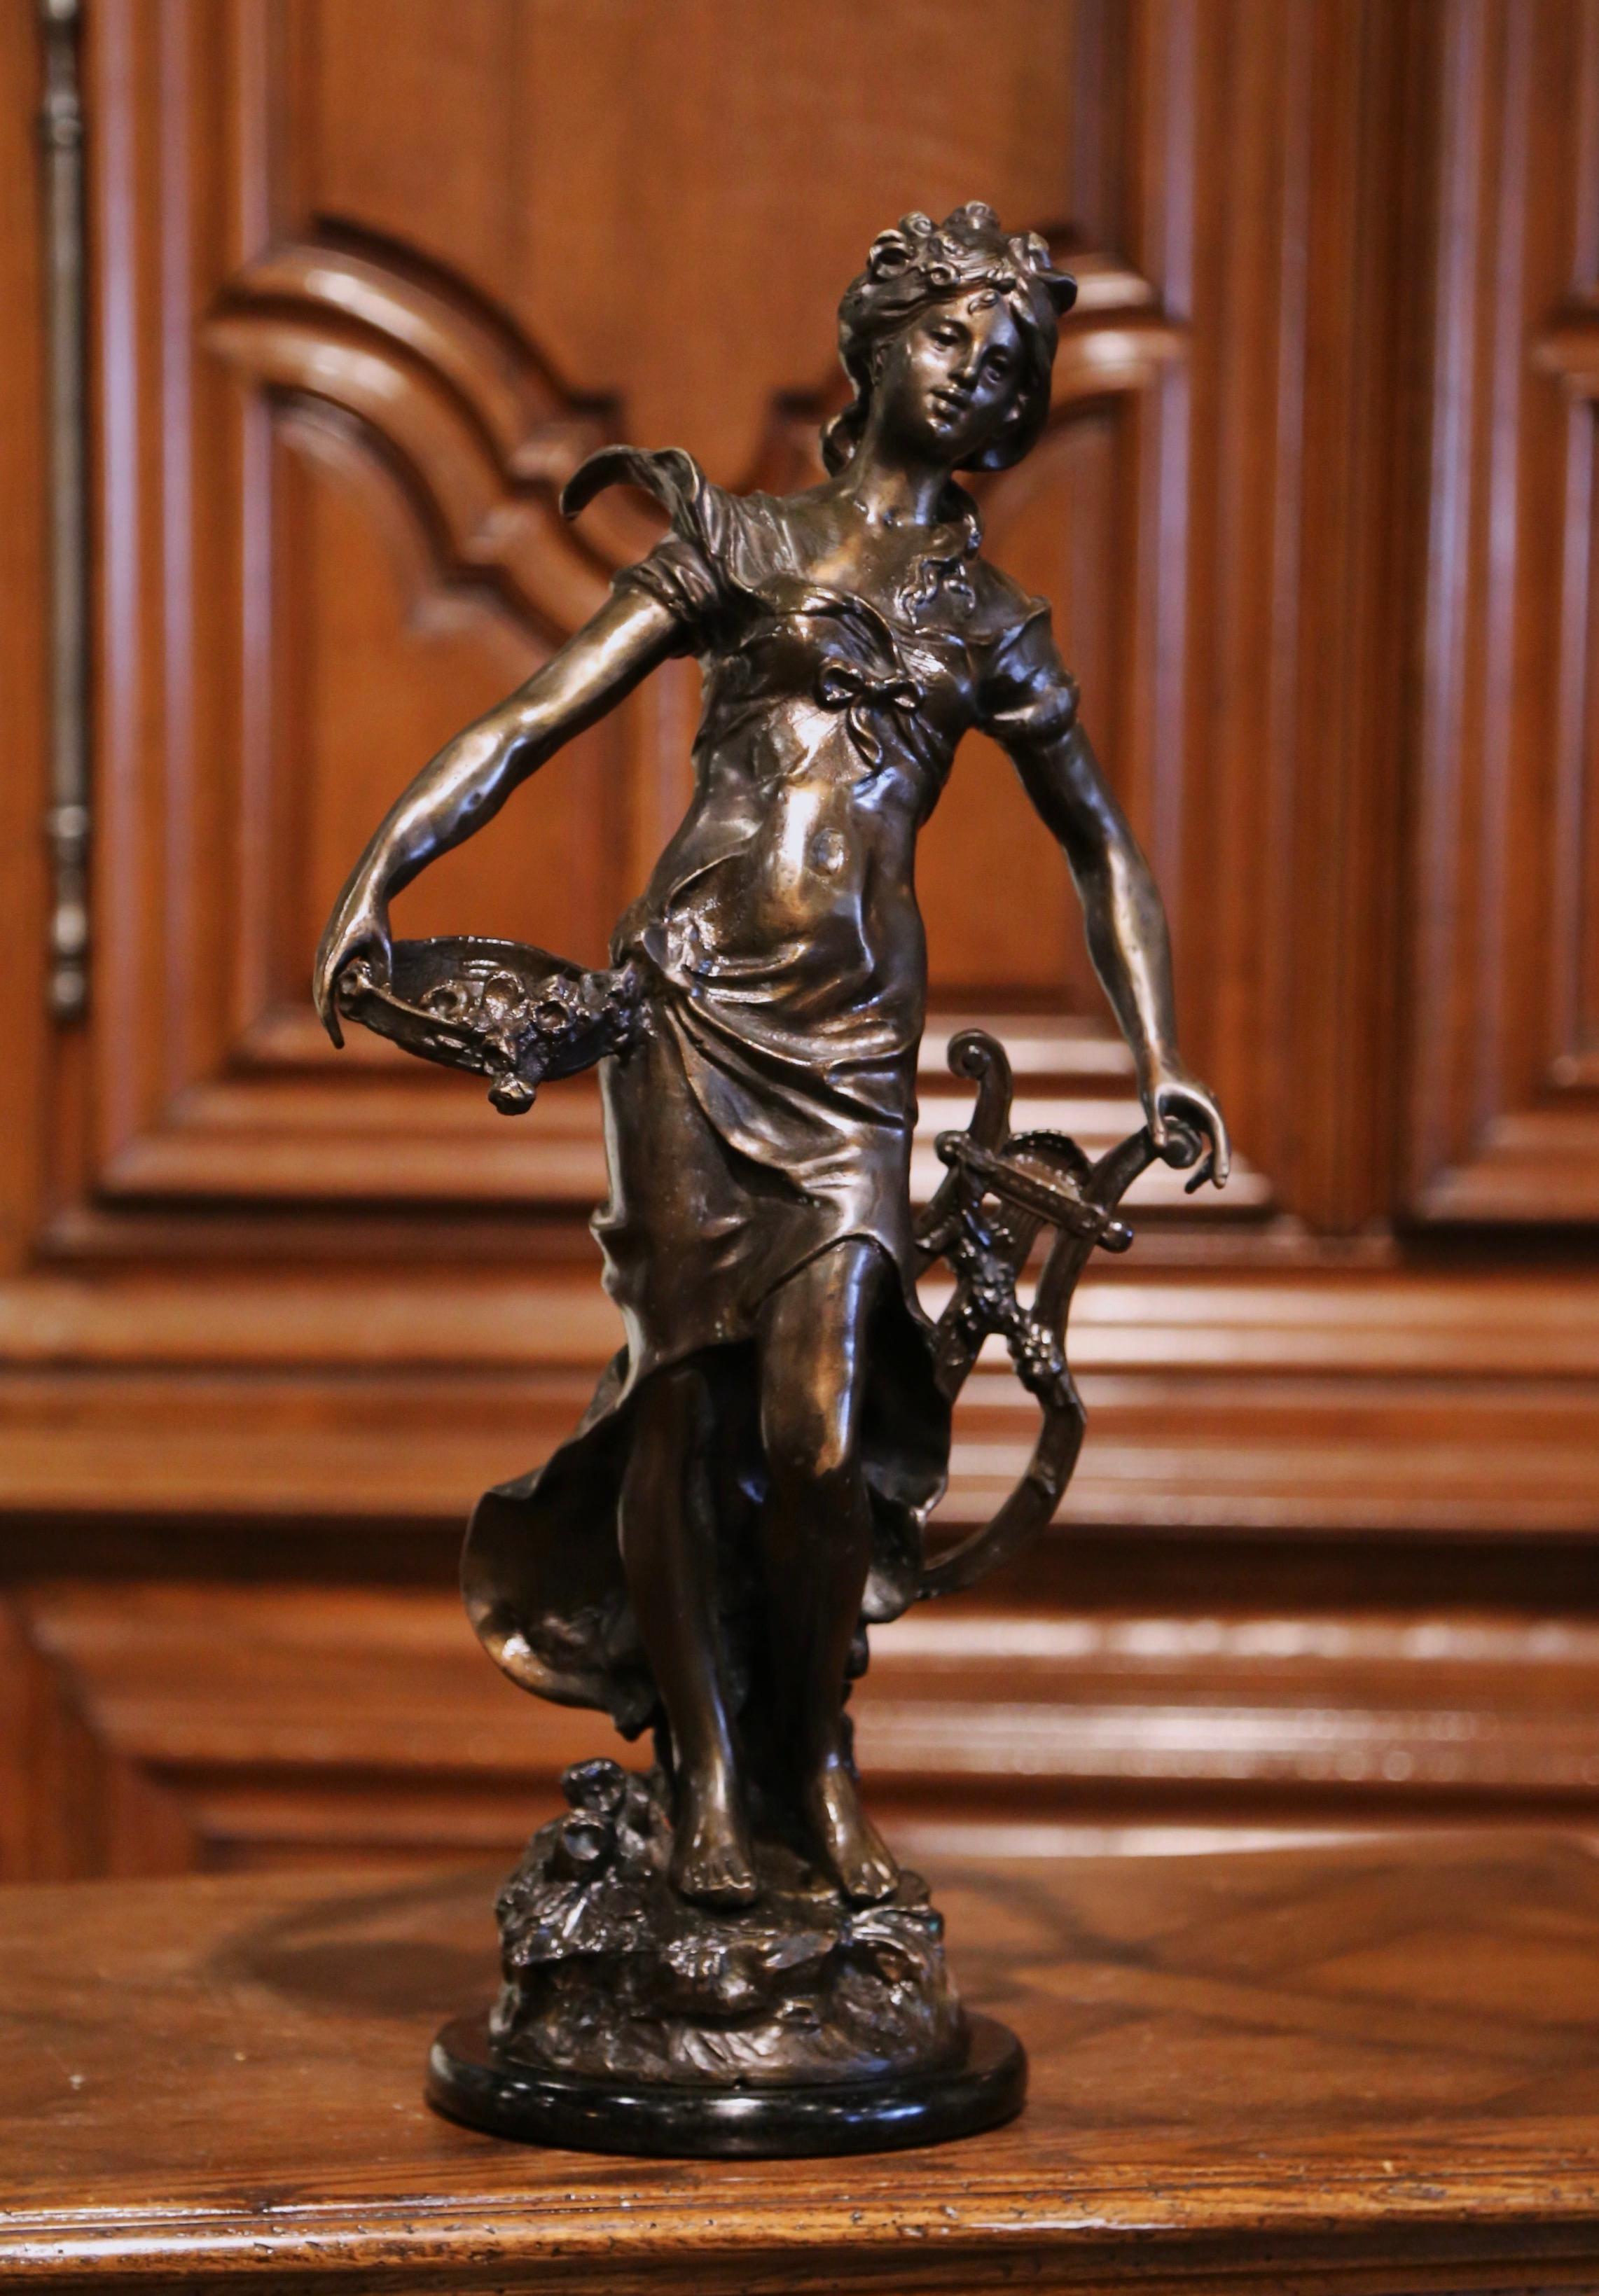 Created in France circa 1890, this antique bronze sculpture depicts a young and elegant beauty holding a lyre in one hand, and a basket of grapes in the other. The female figure stands on a round black base. The allegorical Art Nouveau work is